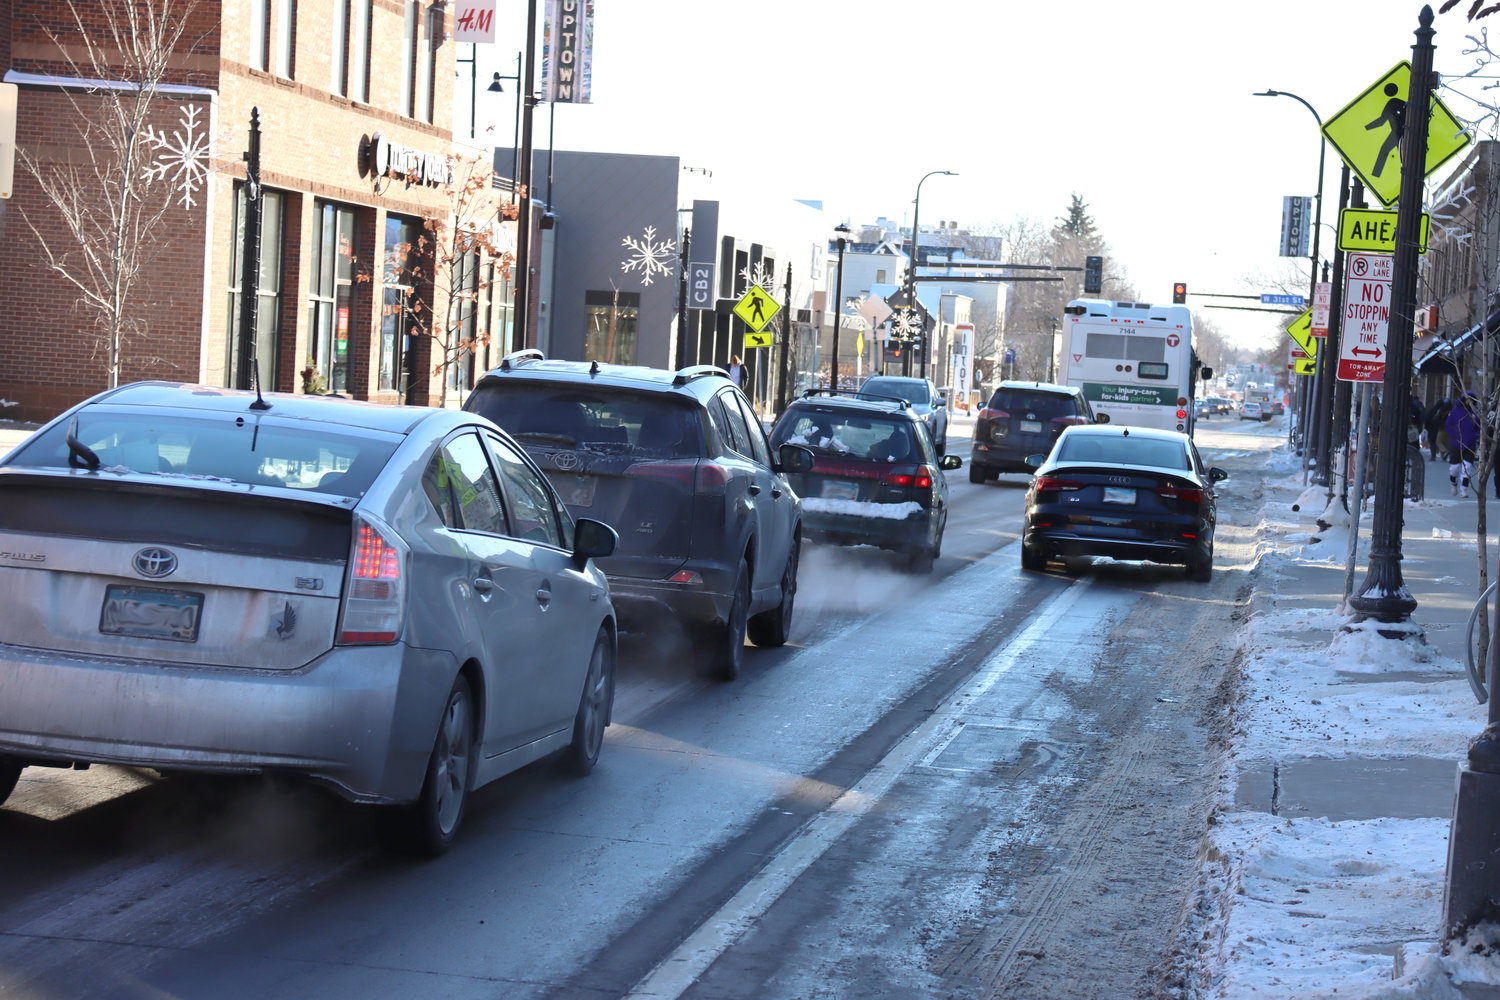 A car stops to load in a bike lane in the area of Hennepin Ave. South between Lake and 31st where all the parking was removed.